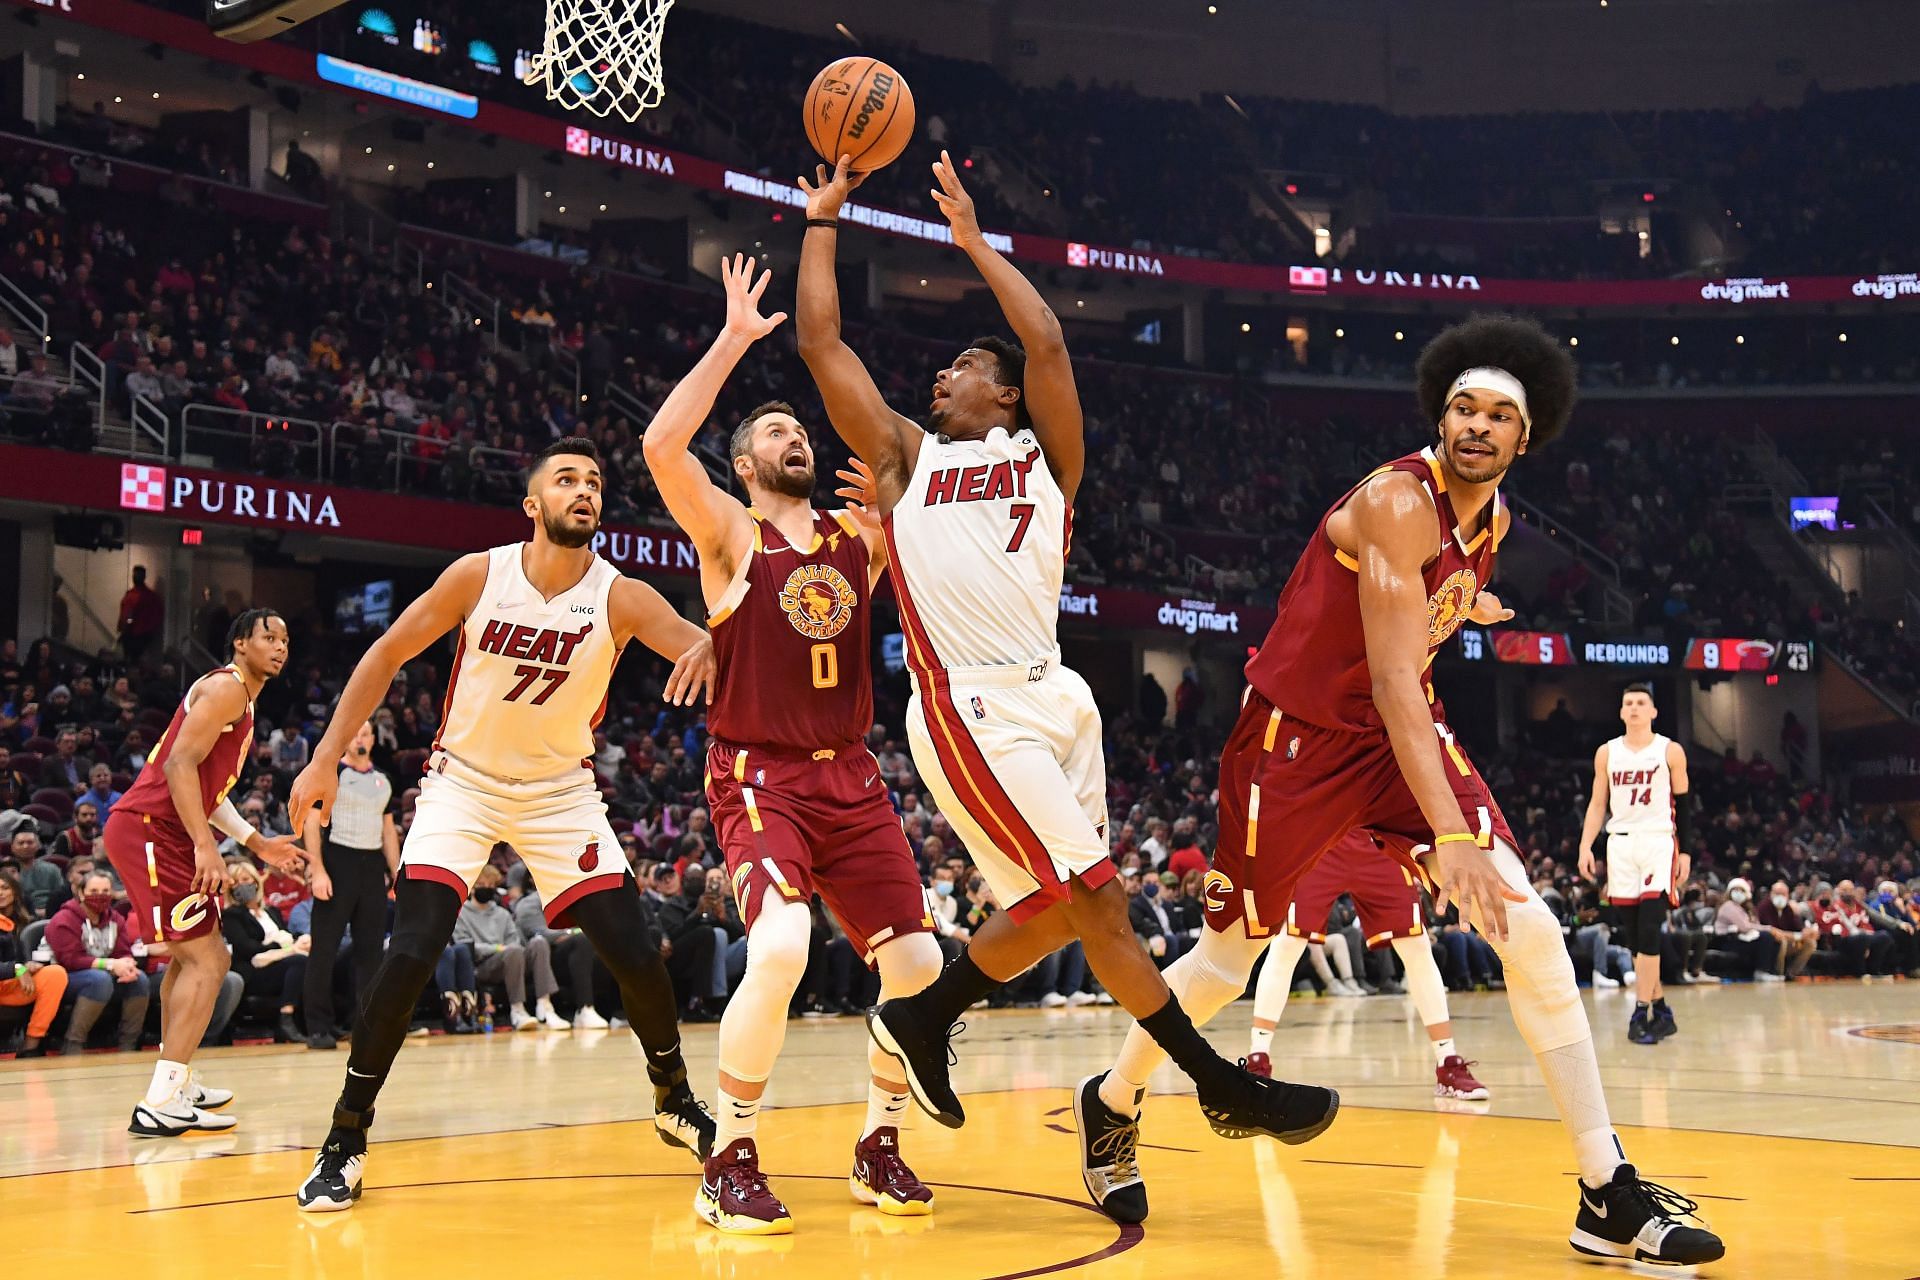 The Cleveland Cavaliers will host the Miami Heat on March 11th